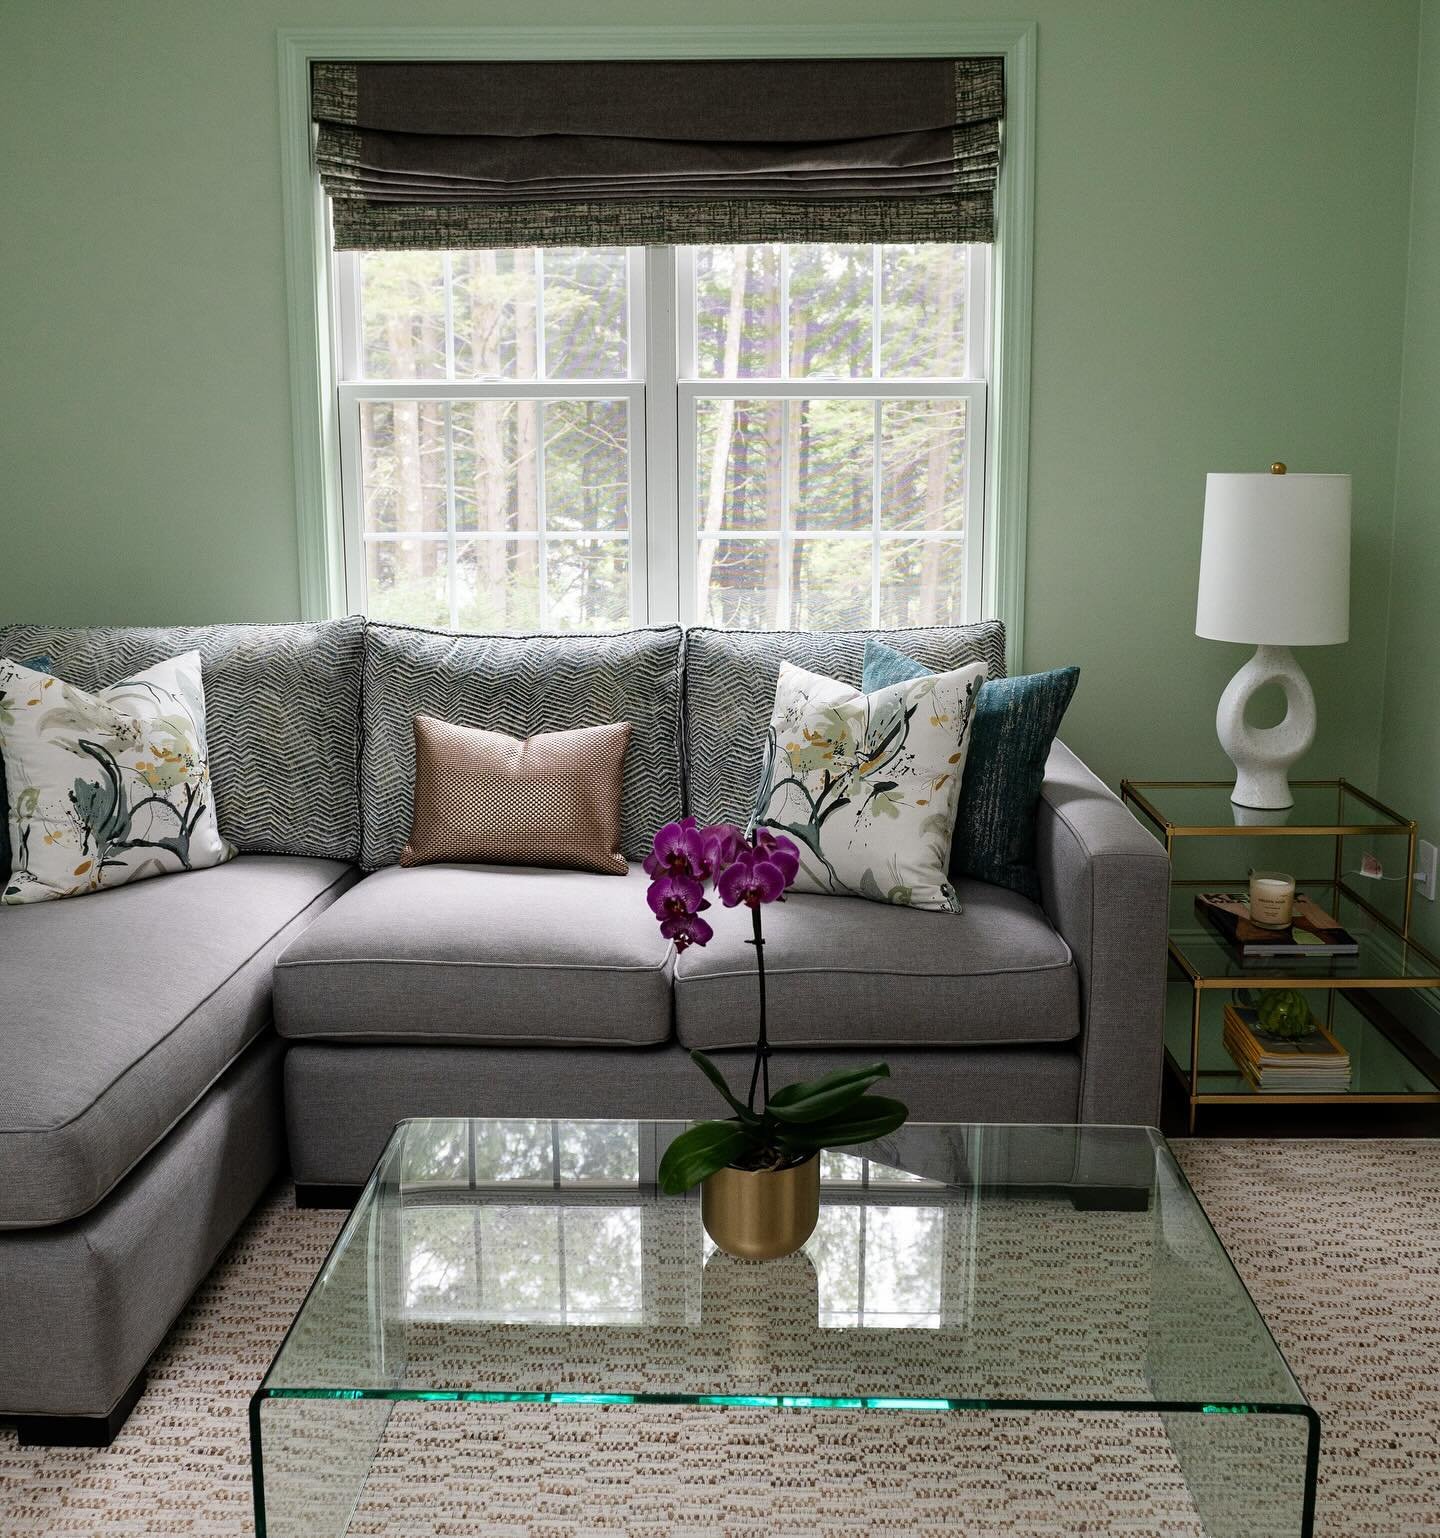 Our client's den is off her lovely double height great room yet not to be overlooked, and definitely wasn't when designing it. 💚 The client and I had the same vision to paint the entire room, including trim and doors, in a color that's both invigora